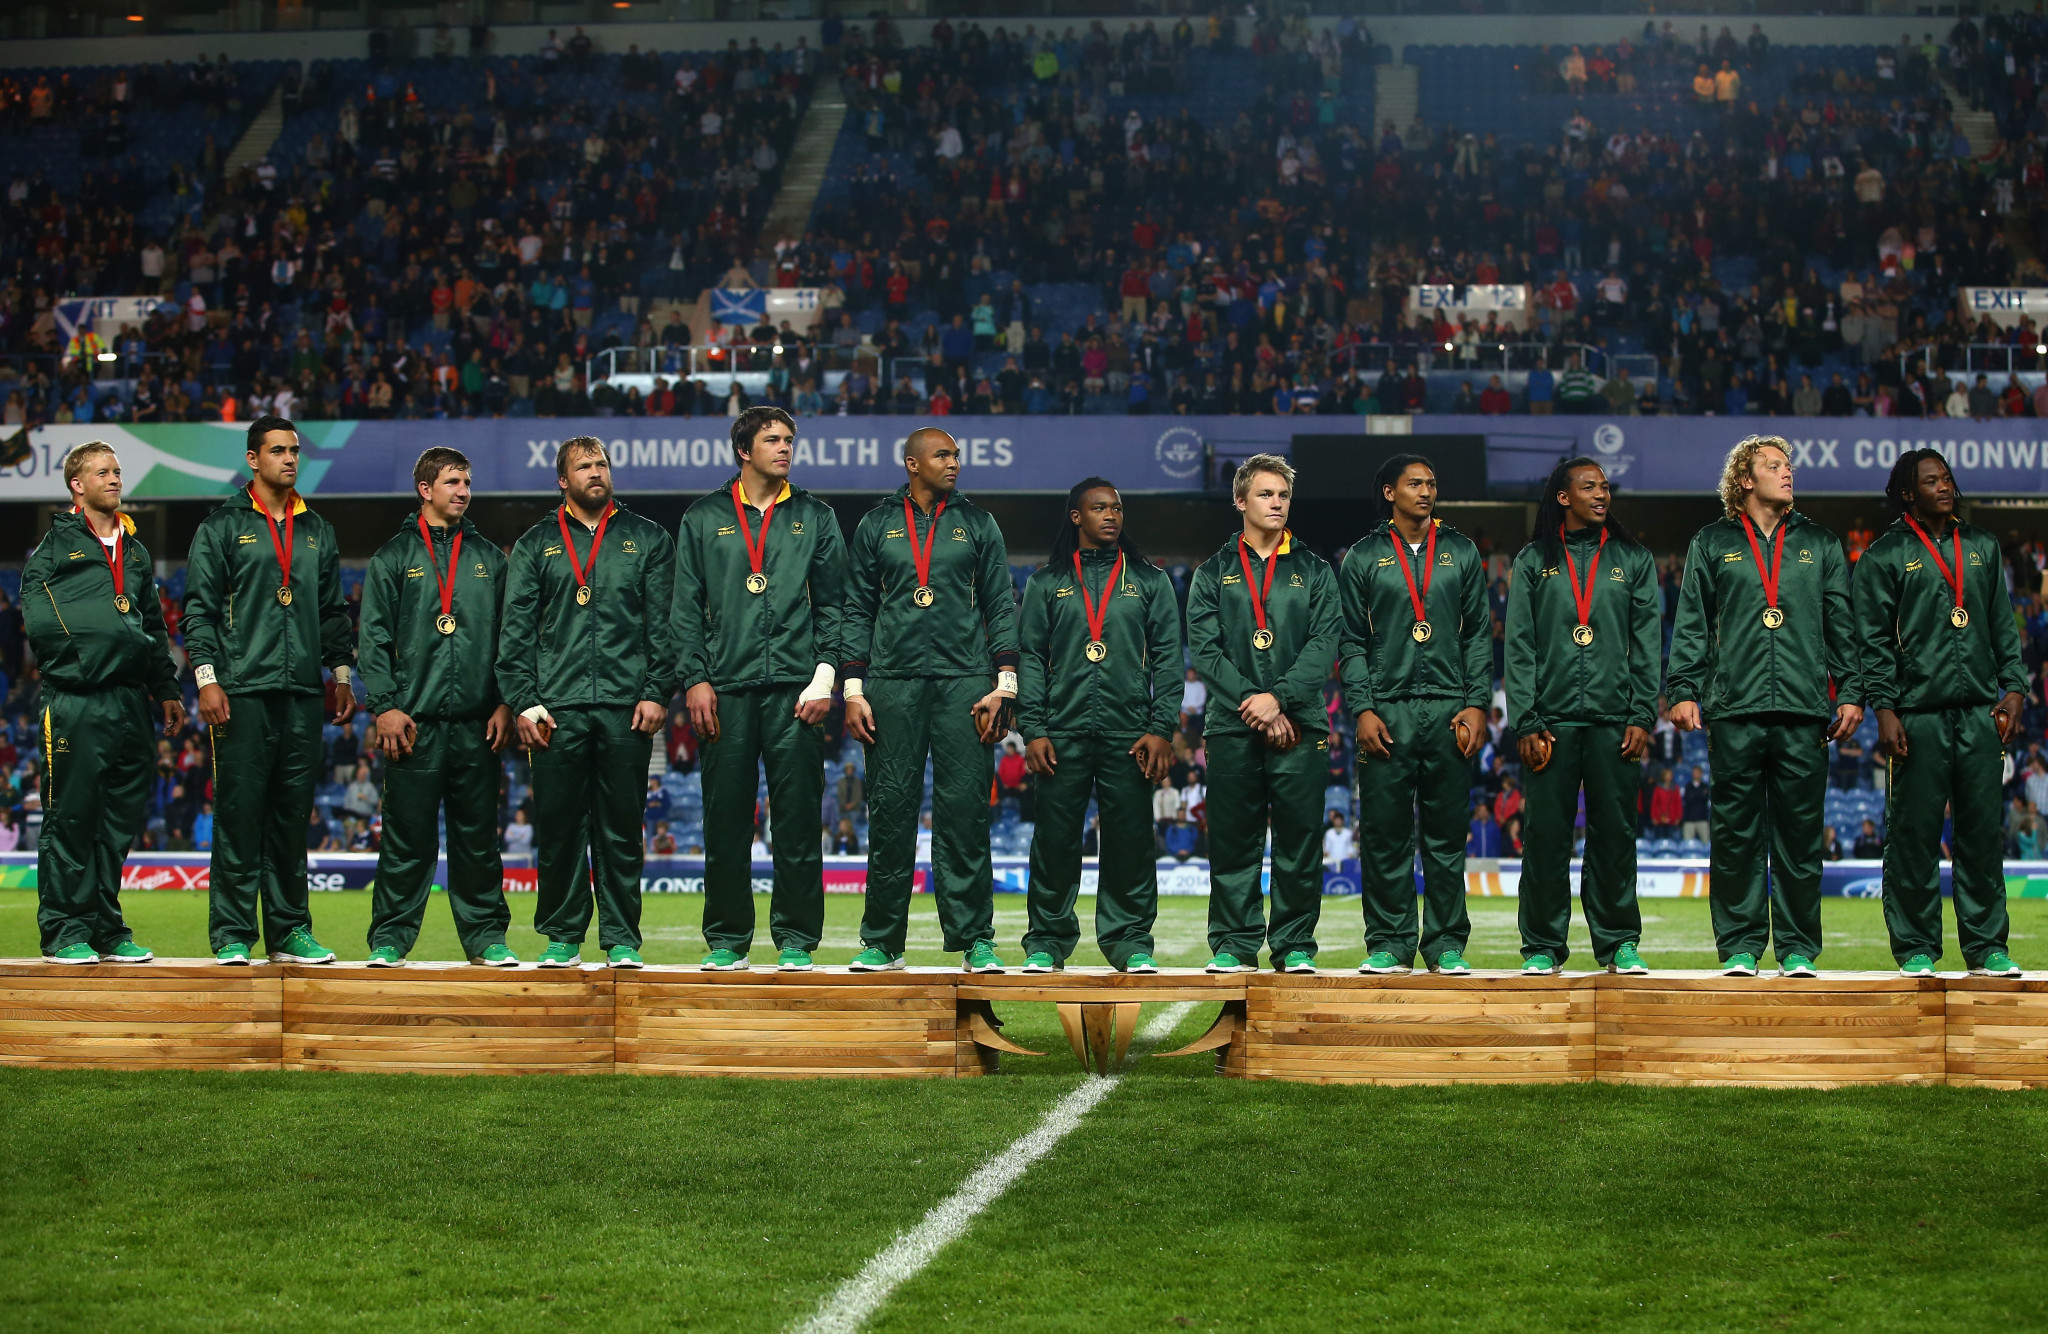 South Africa are the defending men's champions after winning at Glasgow 2014 ©Getty Images